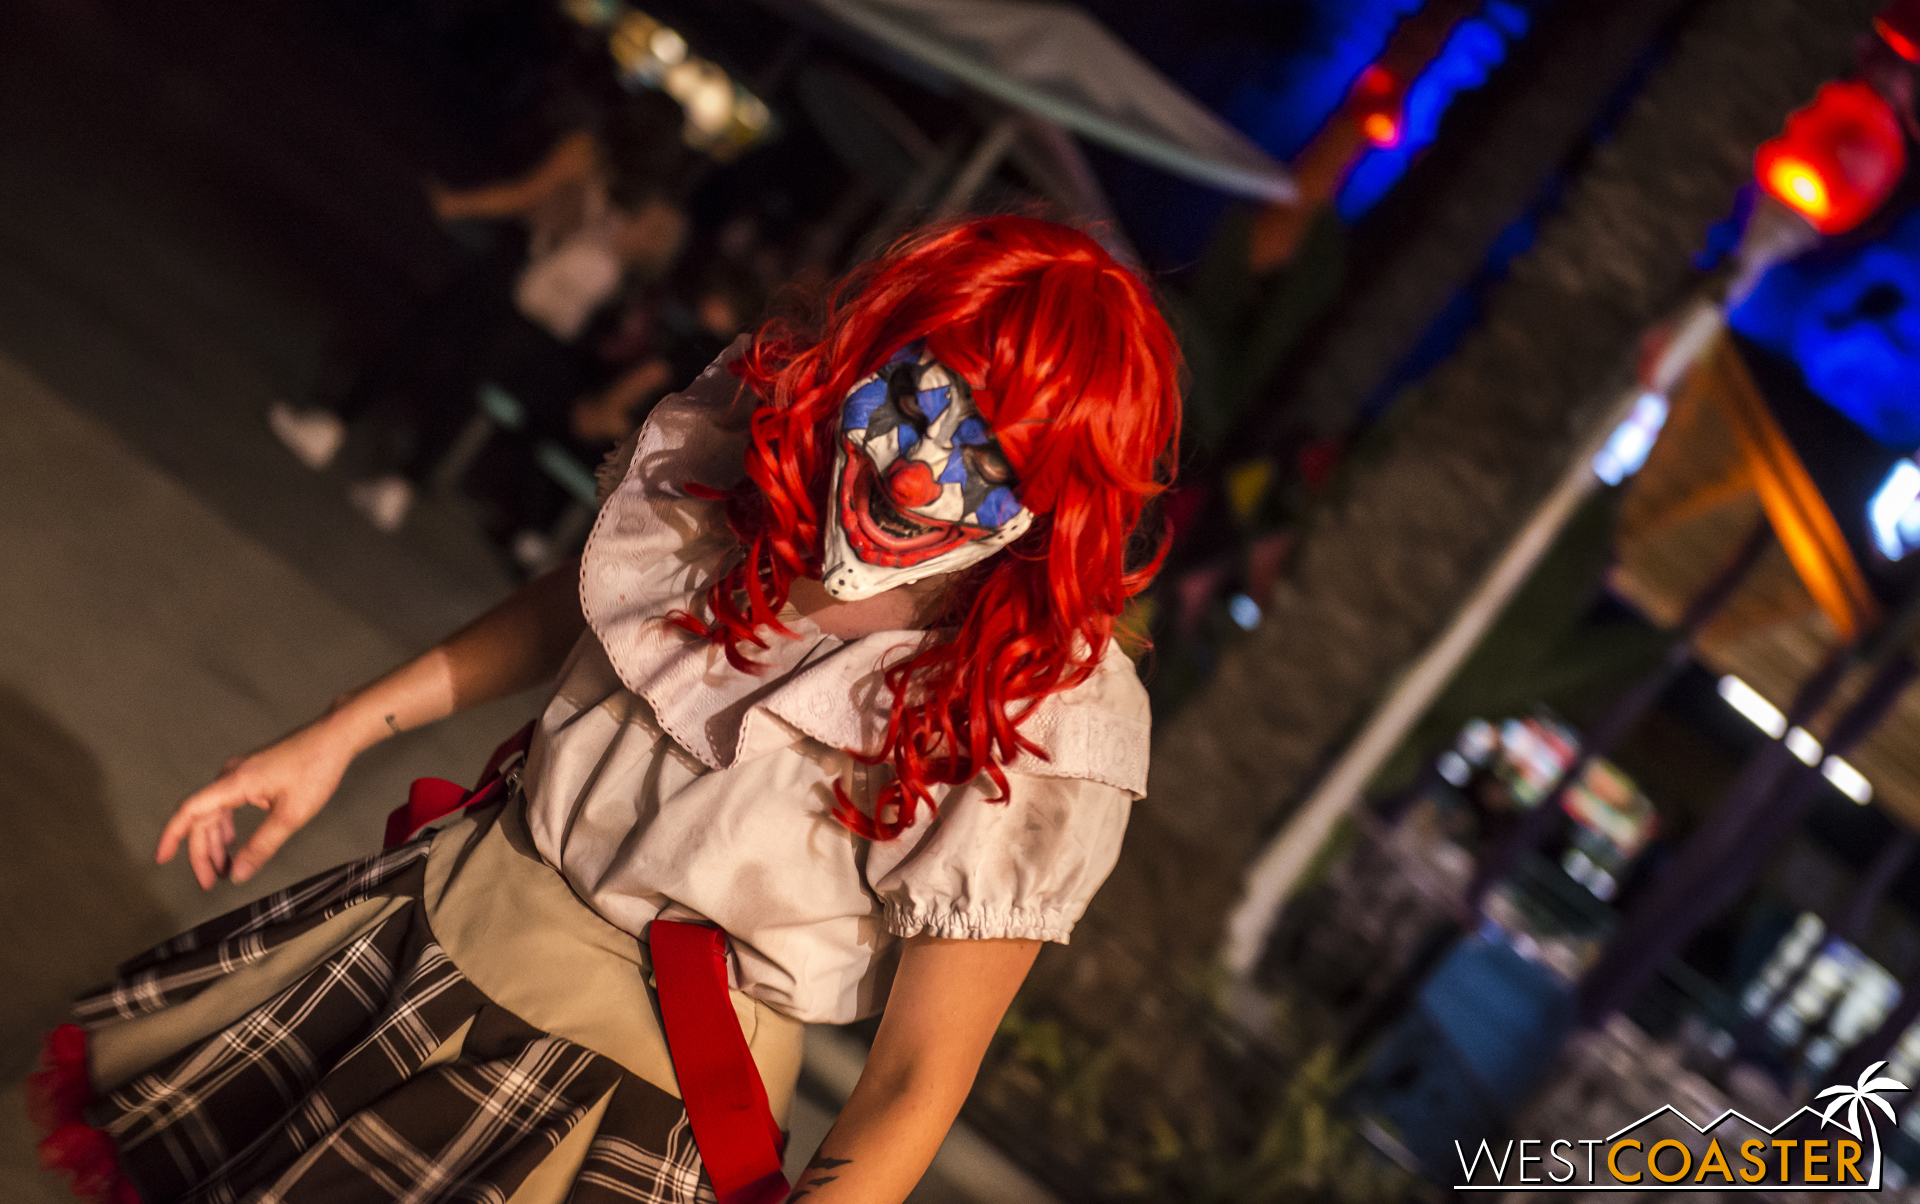  If psychotic clowns are your thing, Carnevil is the place for you! 